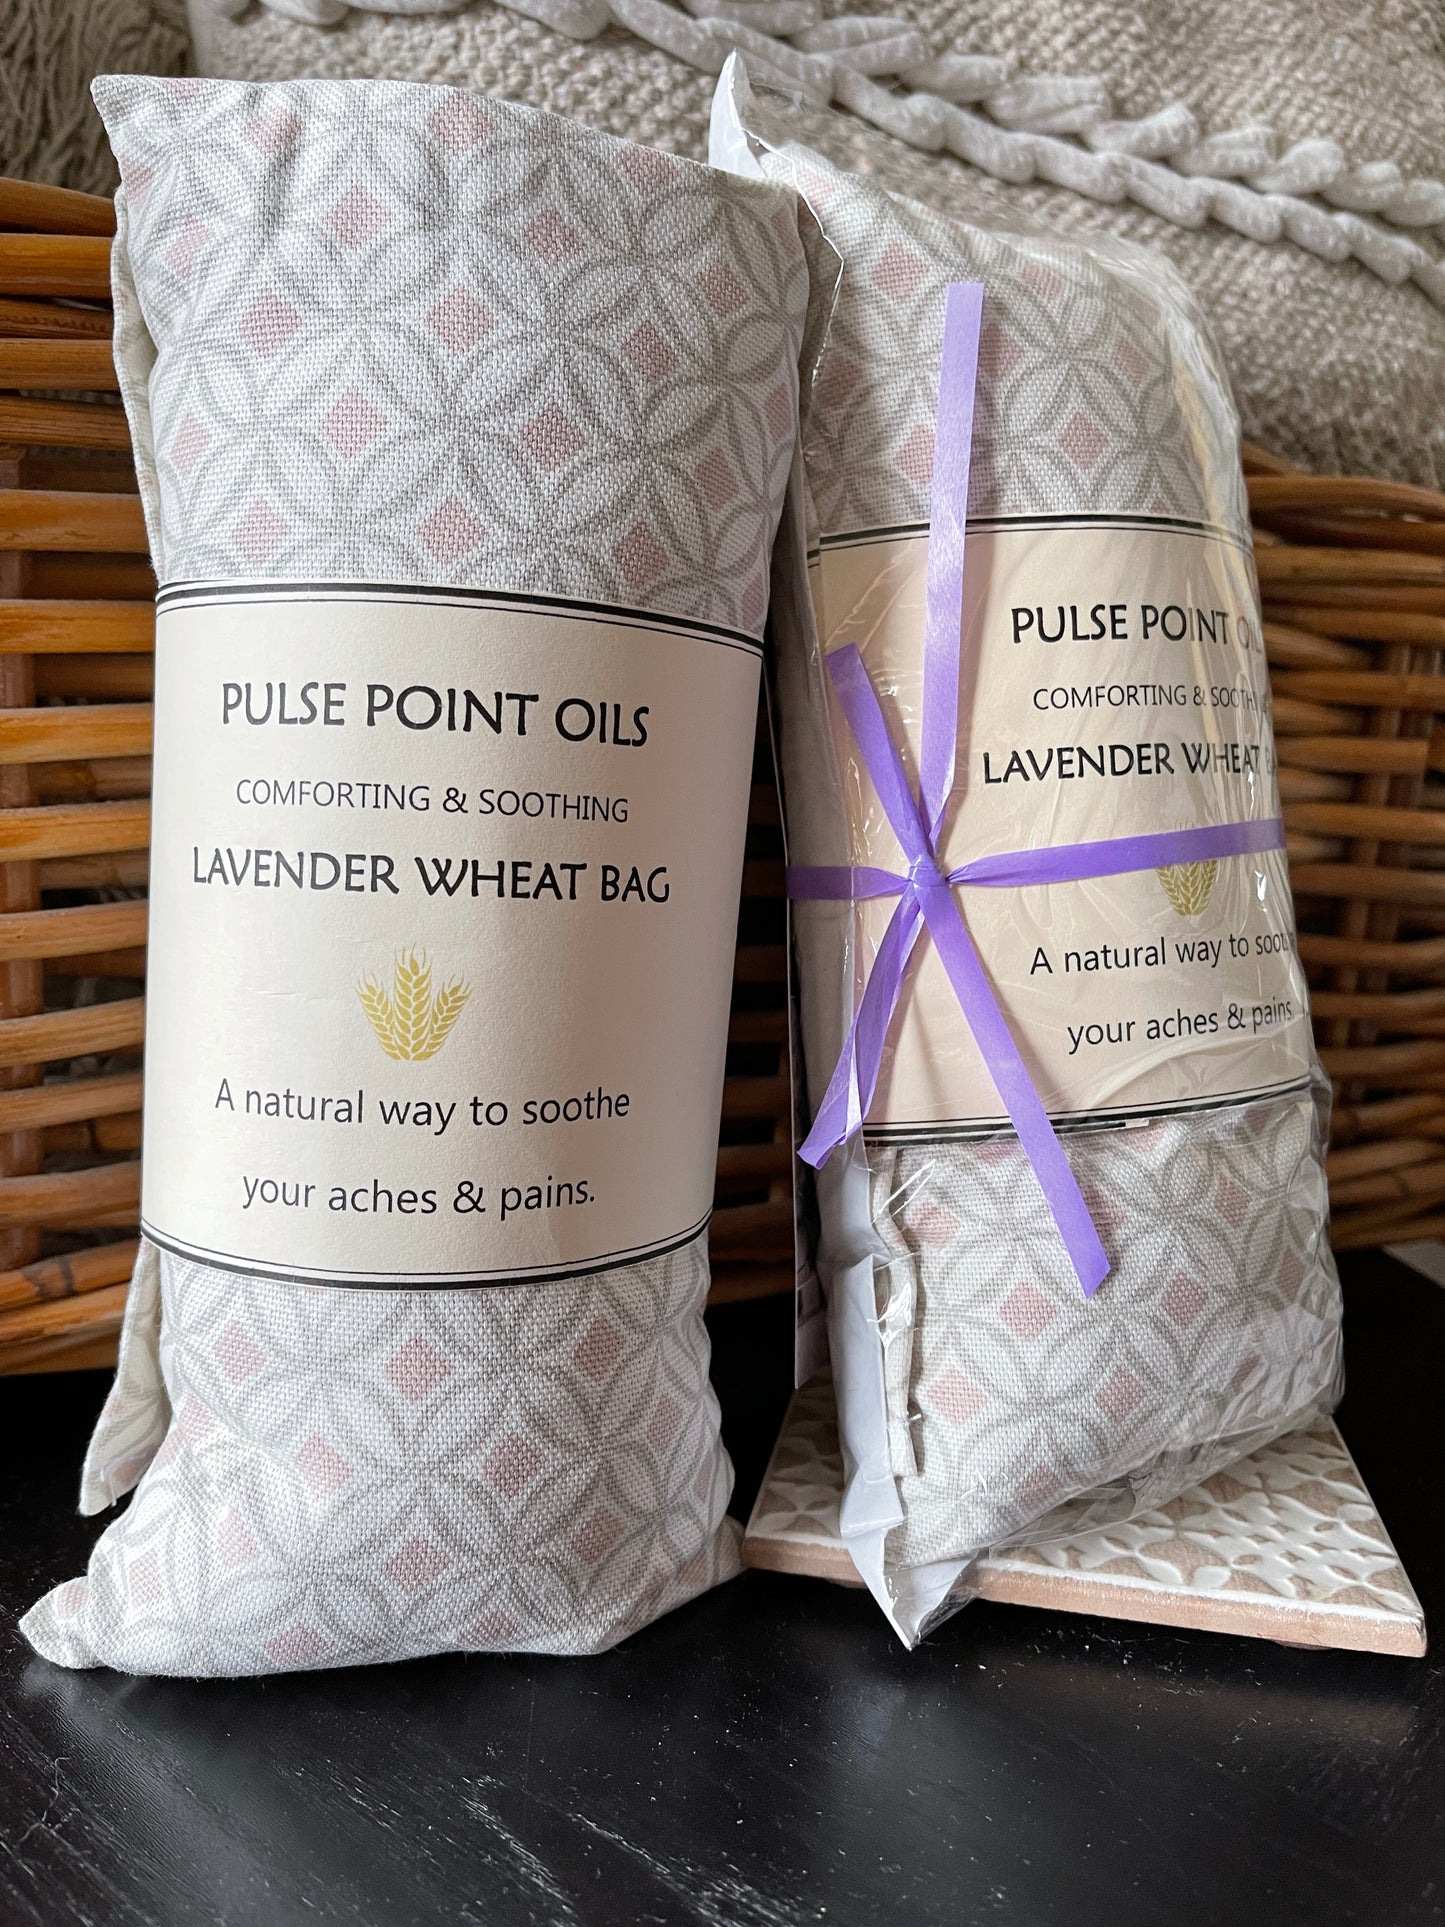 Lavender scented wheat bags for anxiety and panic attacts to help calm and comfort aiding relaxation. Ottis blush cotton printed fabric perfect for her